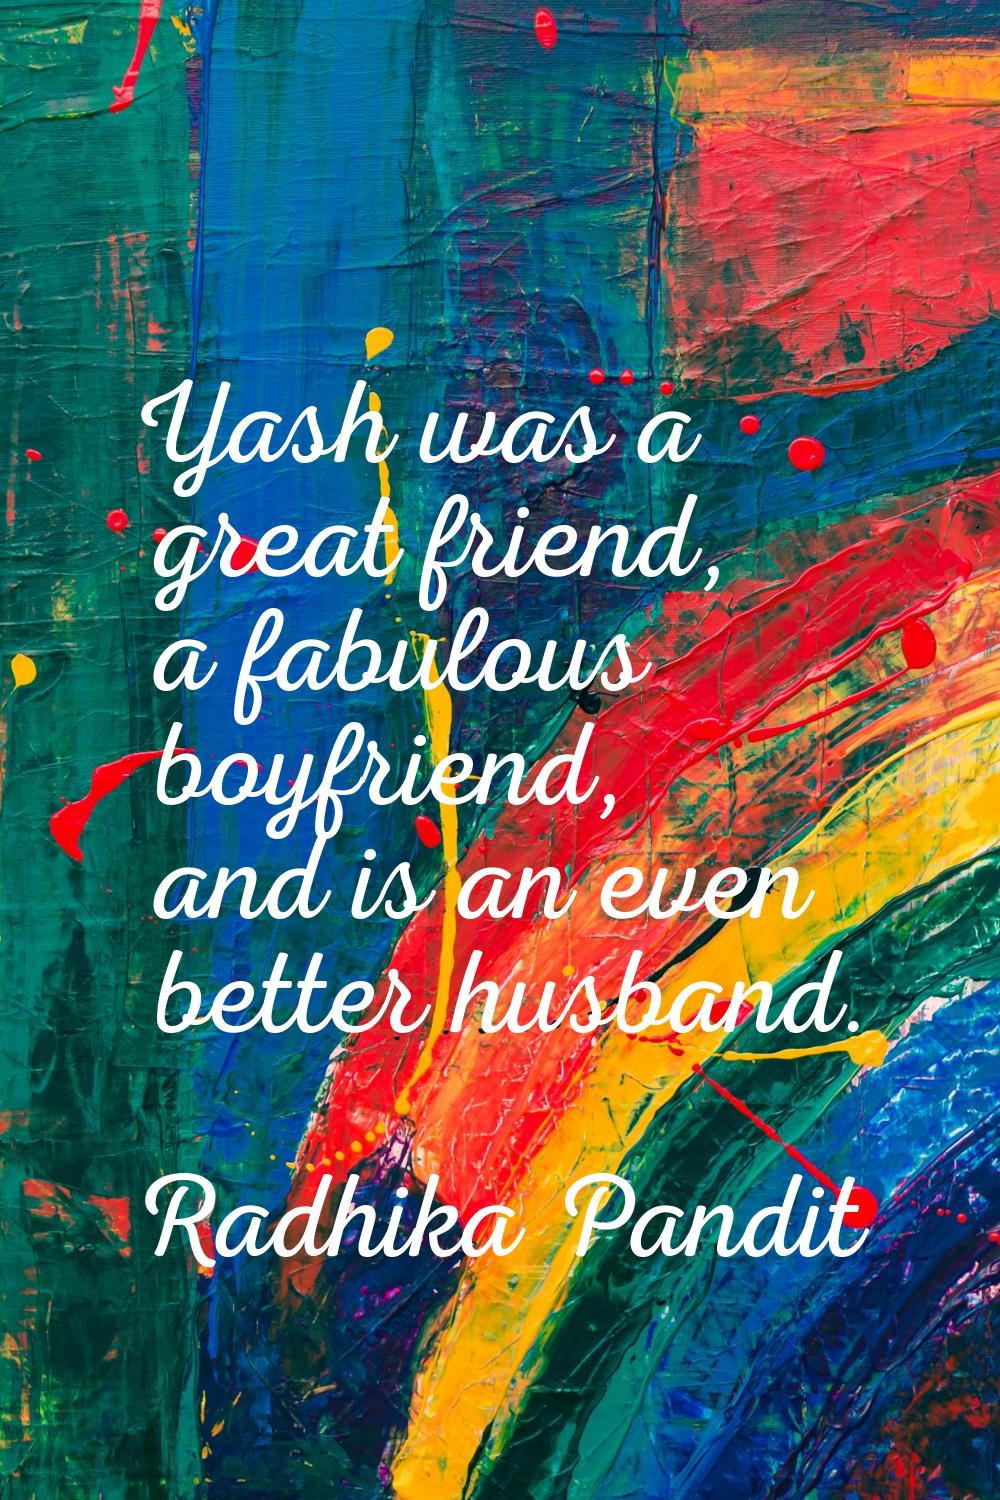 Yash was a great friend, a fabulous boyfriend, and is an even better husband.